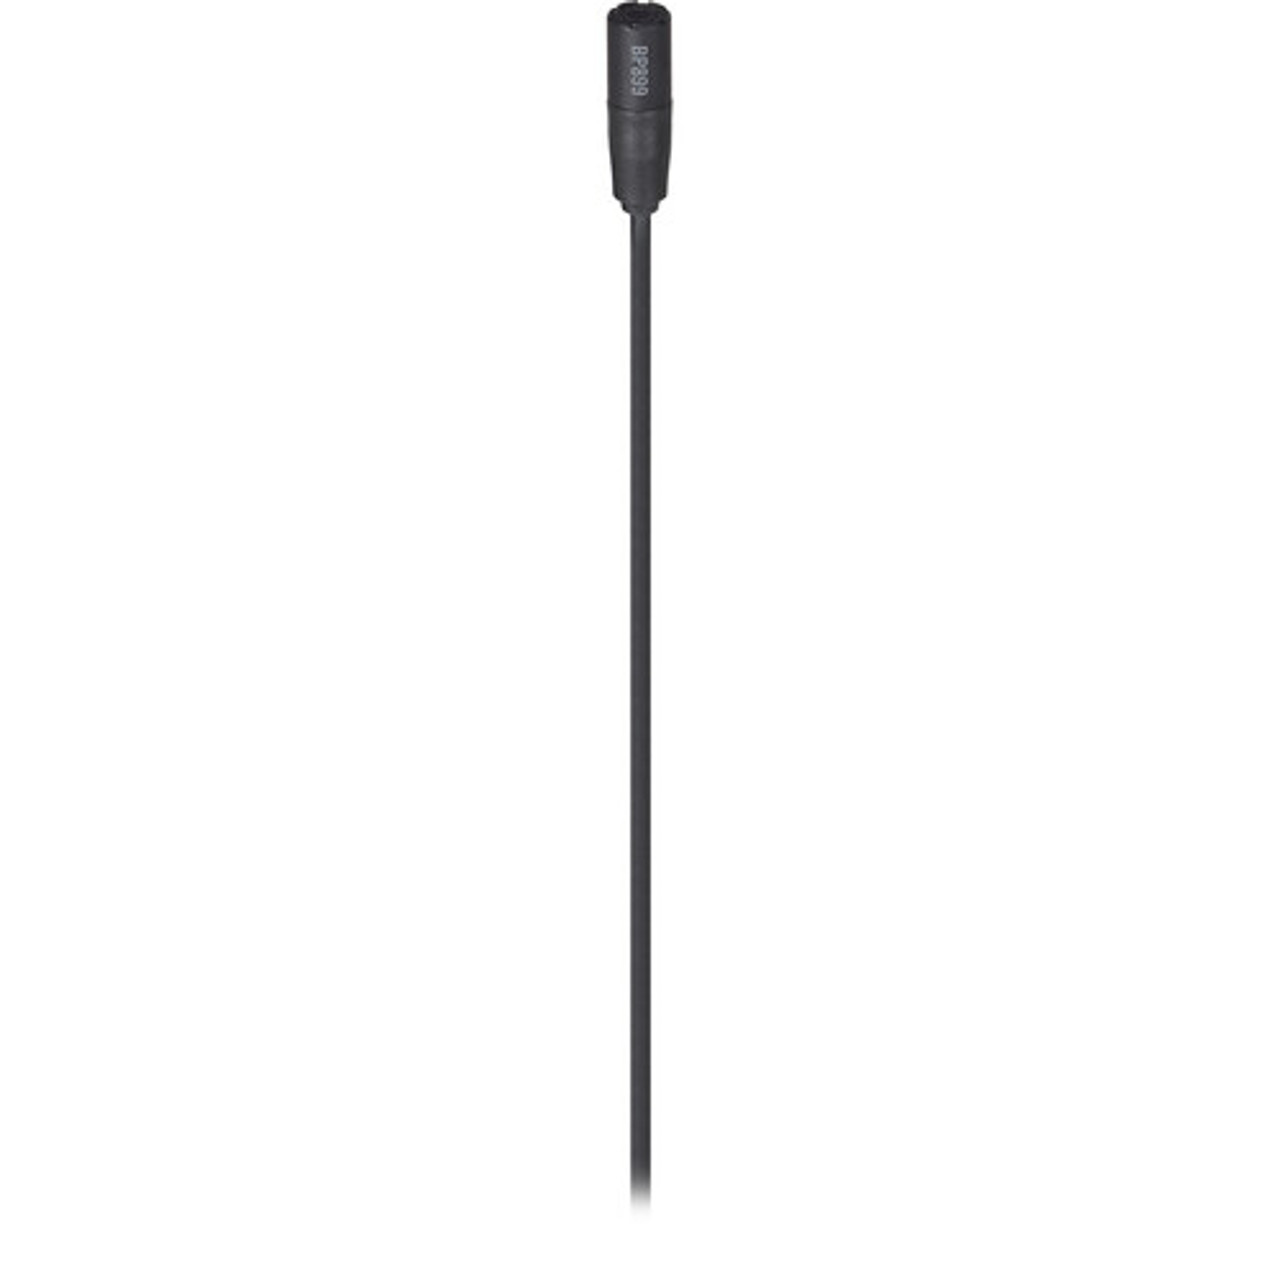 Audio-Technica BP899 Subminiature Omnidirectional Lavalier Microphone with Normal Sensitivity, Hirose cH-Style Connector & XLR/Power Module (Black) (BP899)